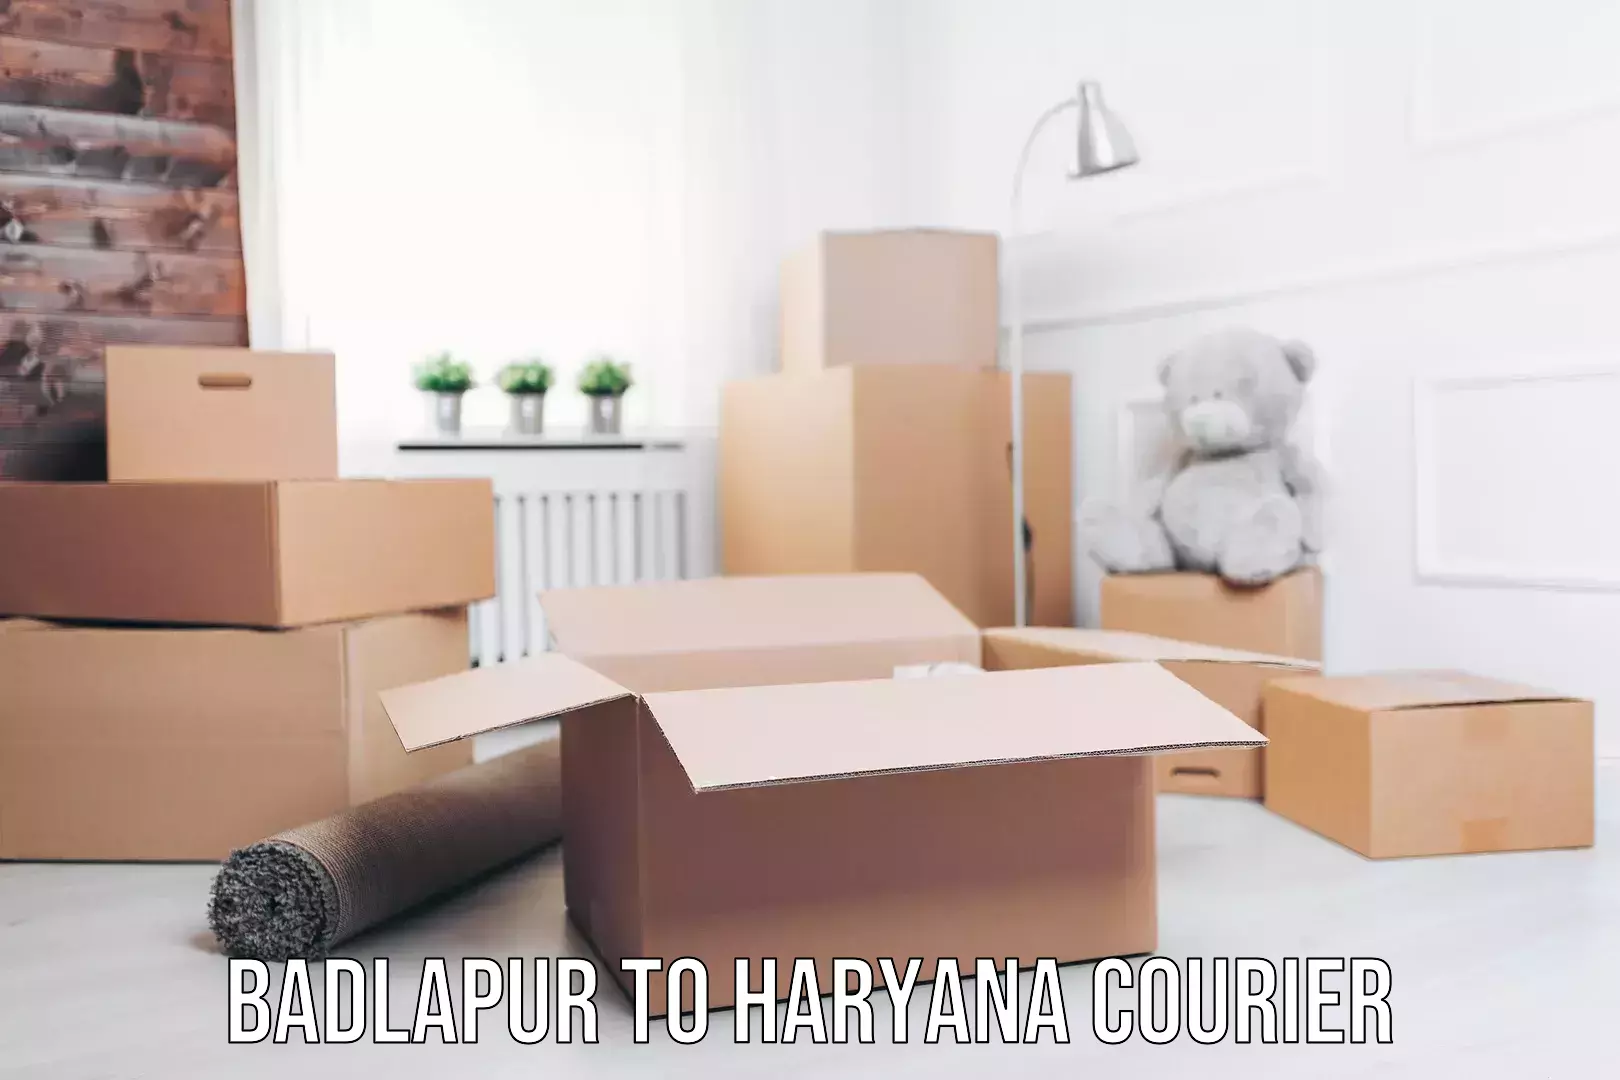 Enhanced tracking features in Badlapur to Haryana